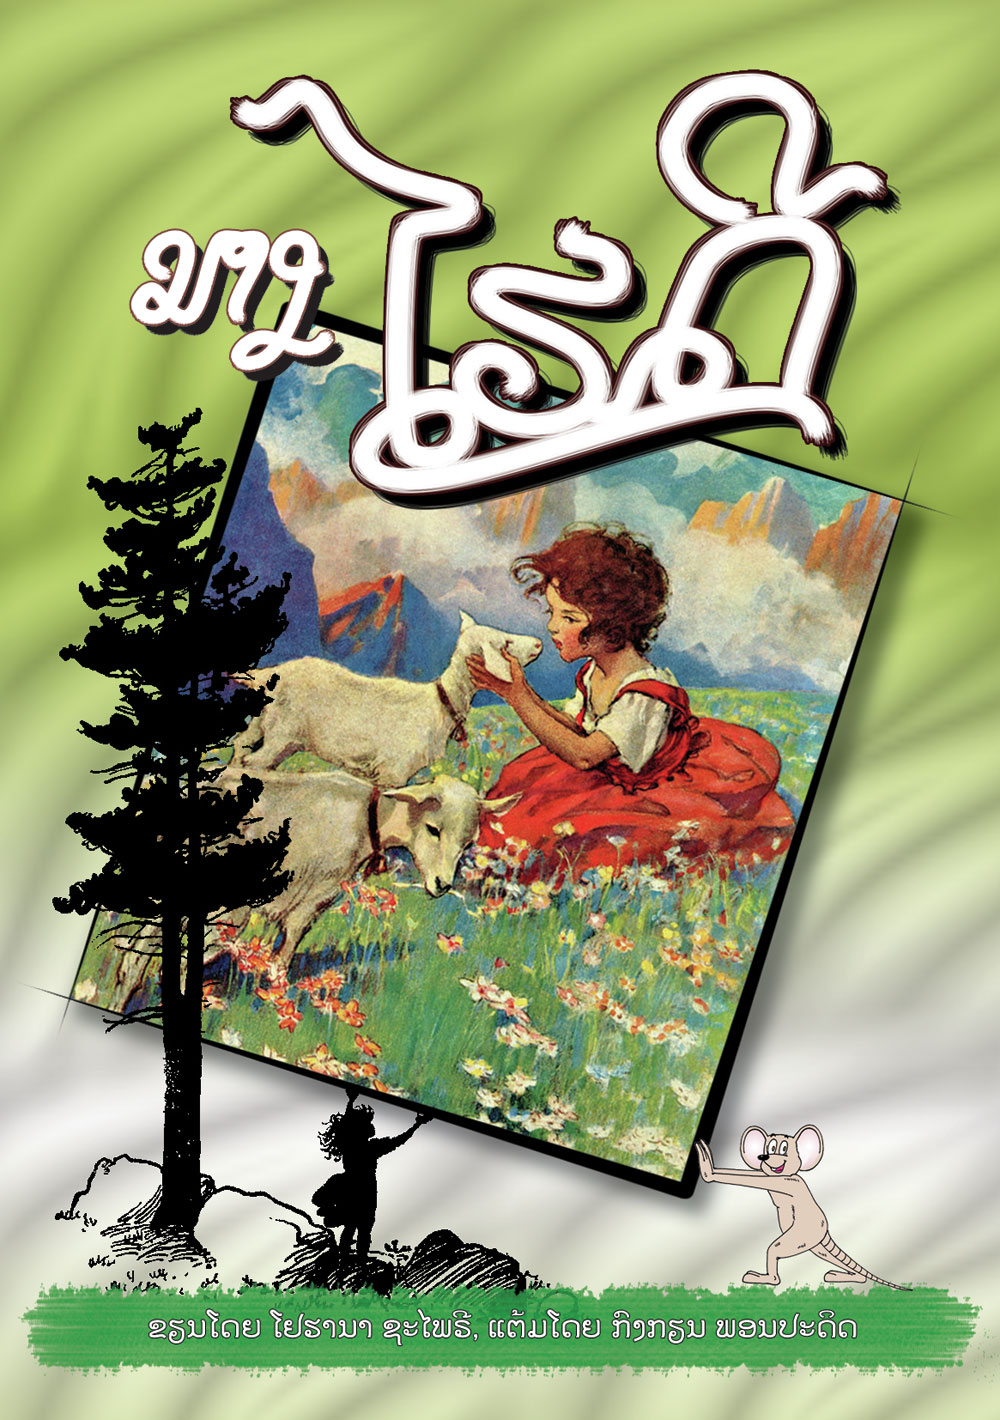 Heidi large book cover, published in Lao language